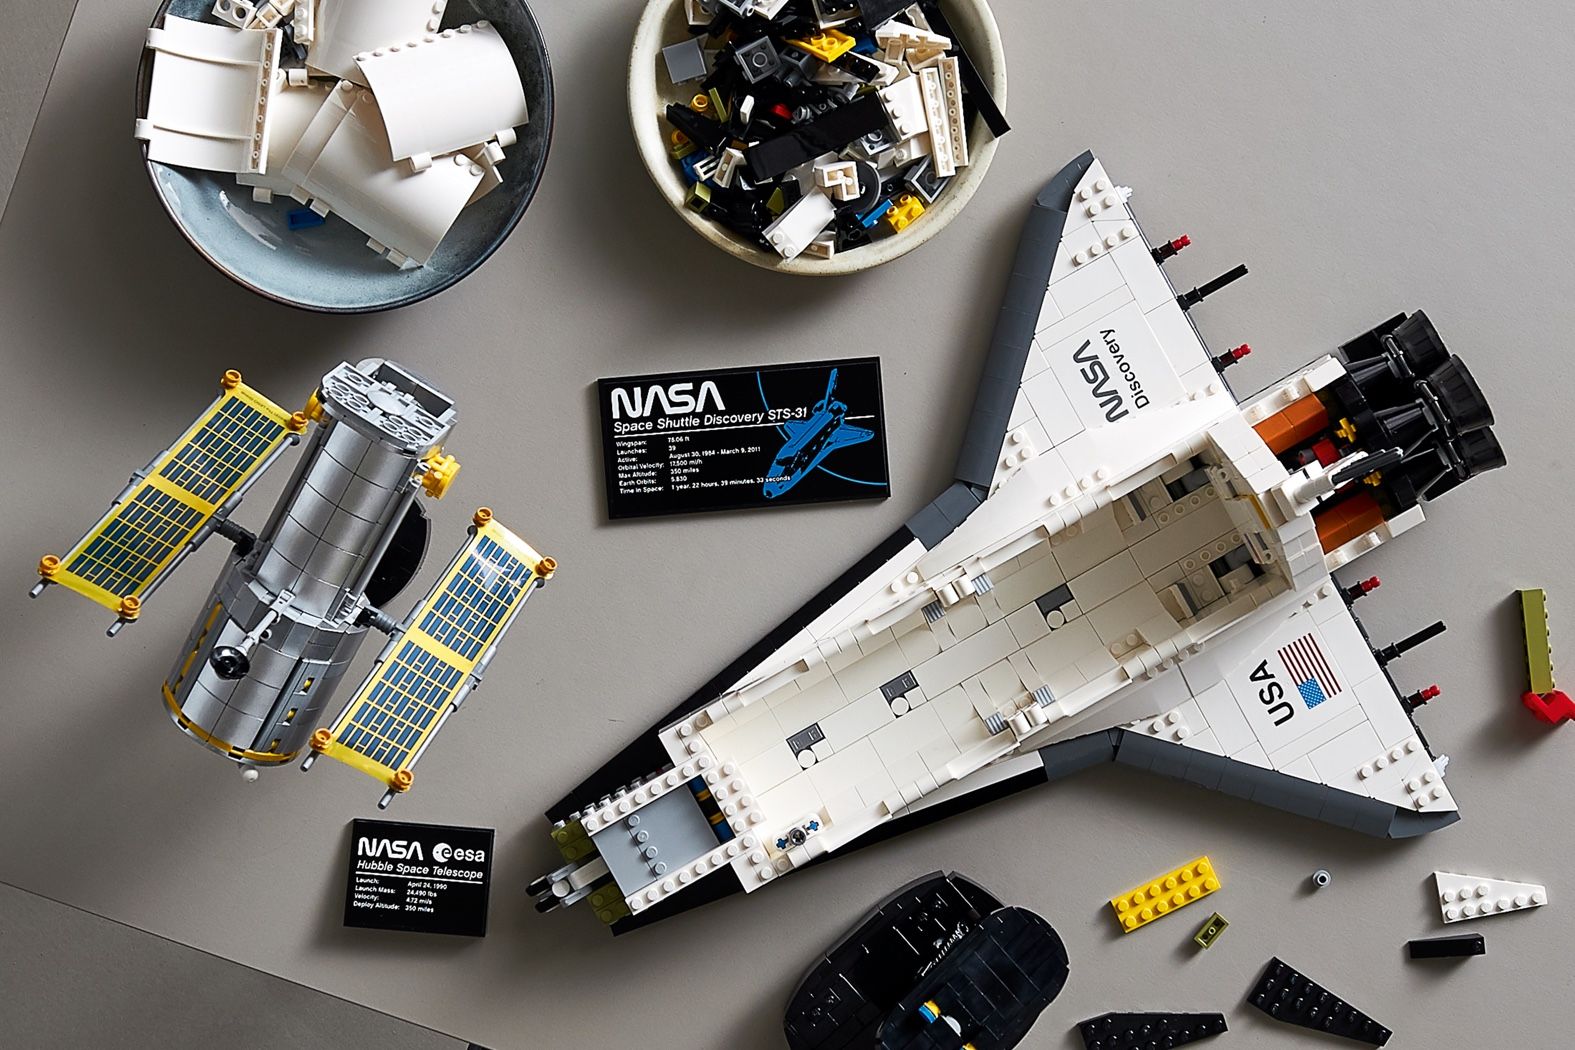 Lego's NASA Space Shuttle Discovery set celebrates 30 years since Hubble Telescope launch photo 3